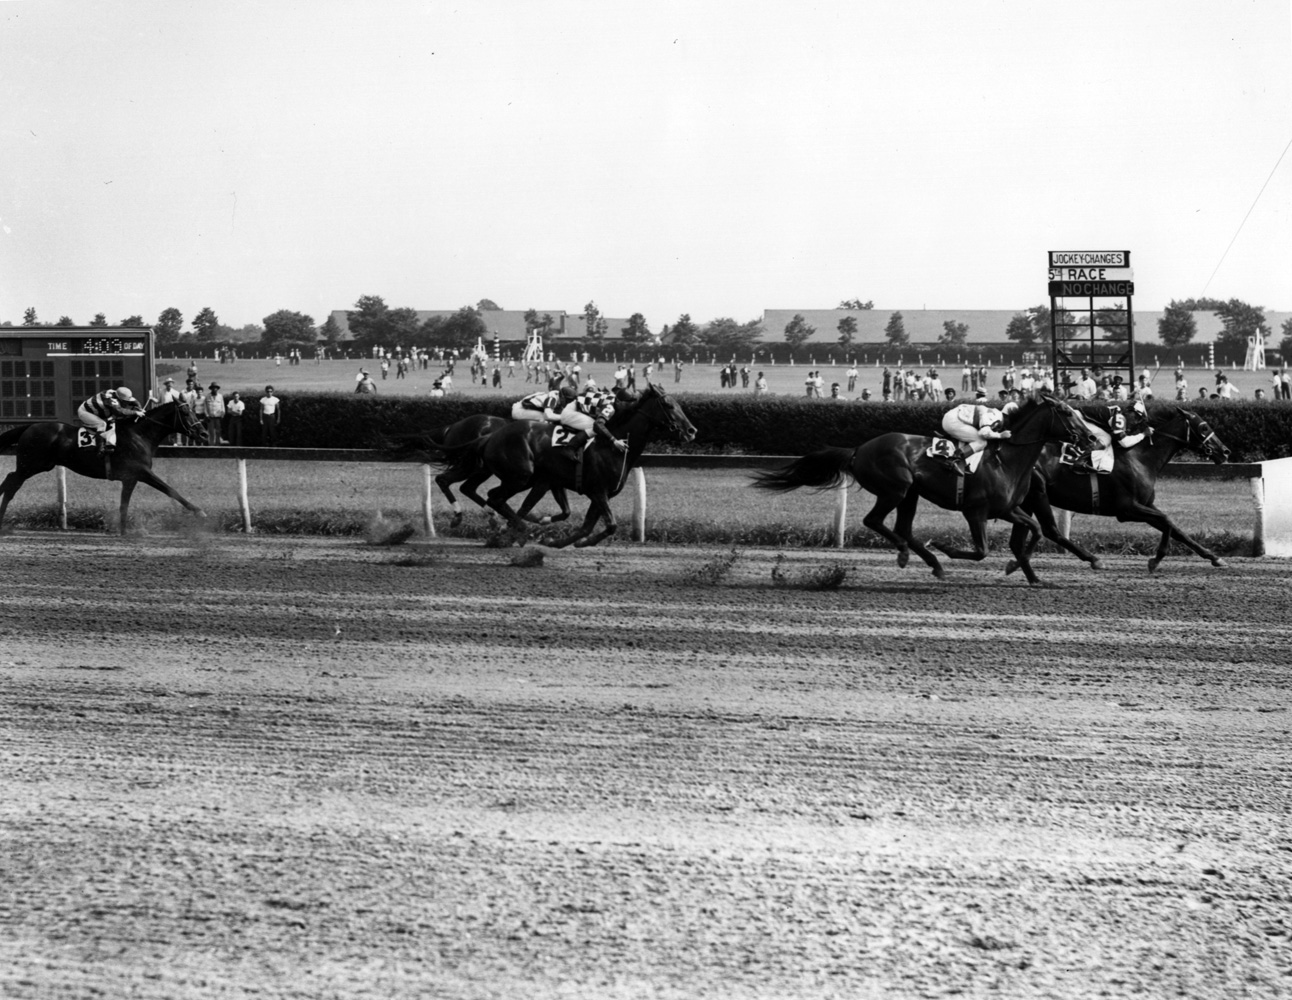 Assault (Eddie Arcaro up) winning the 1947 Butler Handicap at Jamaica Race Course (Keeneland Library Morgan Collection/Museum Collection)